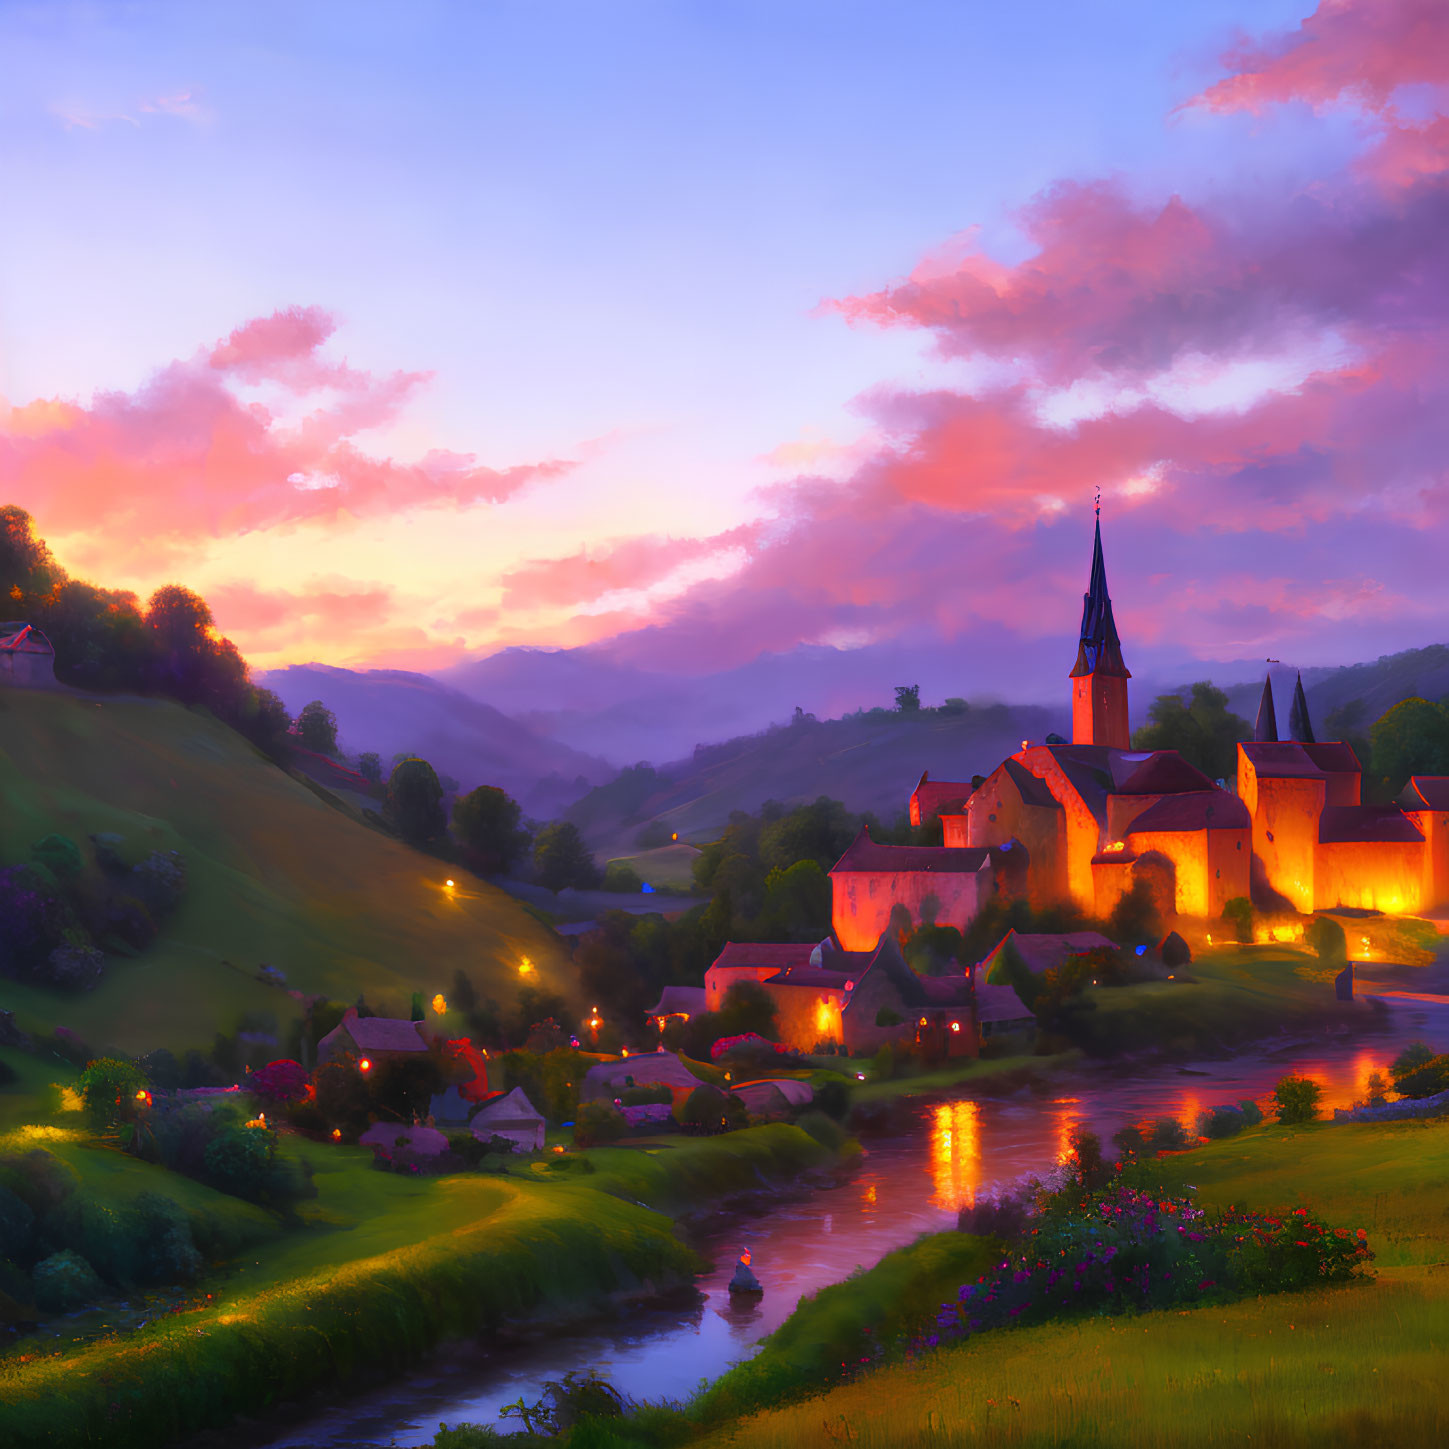 Picturesque village with illuminated buildings at twilight in valley with river and hills under pastel sky